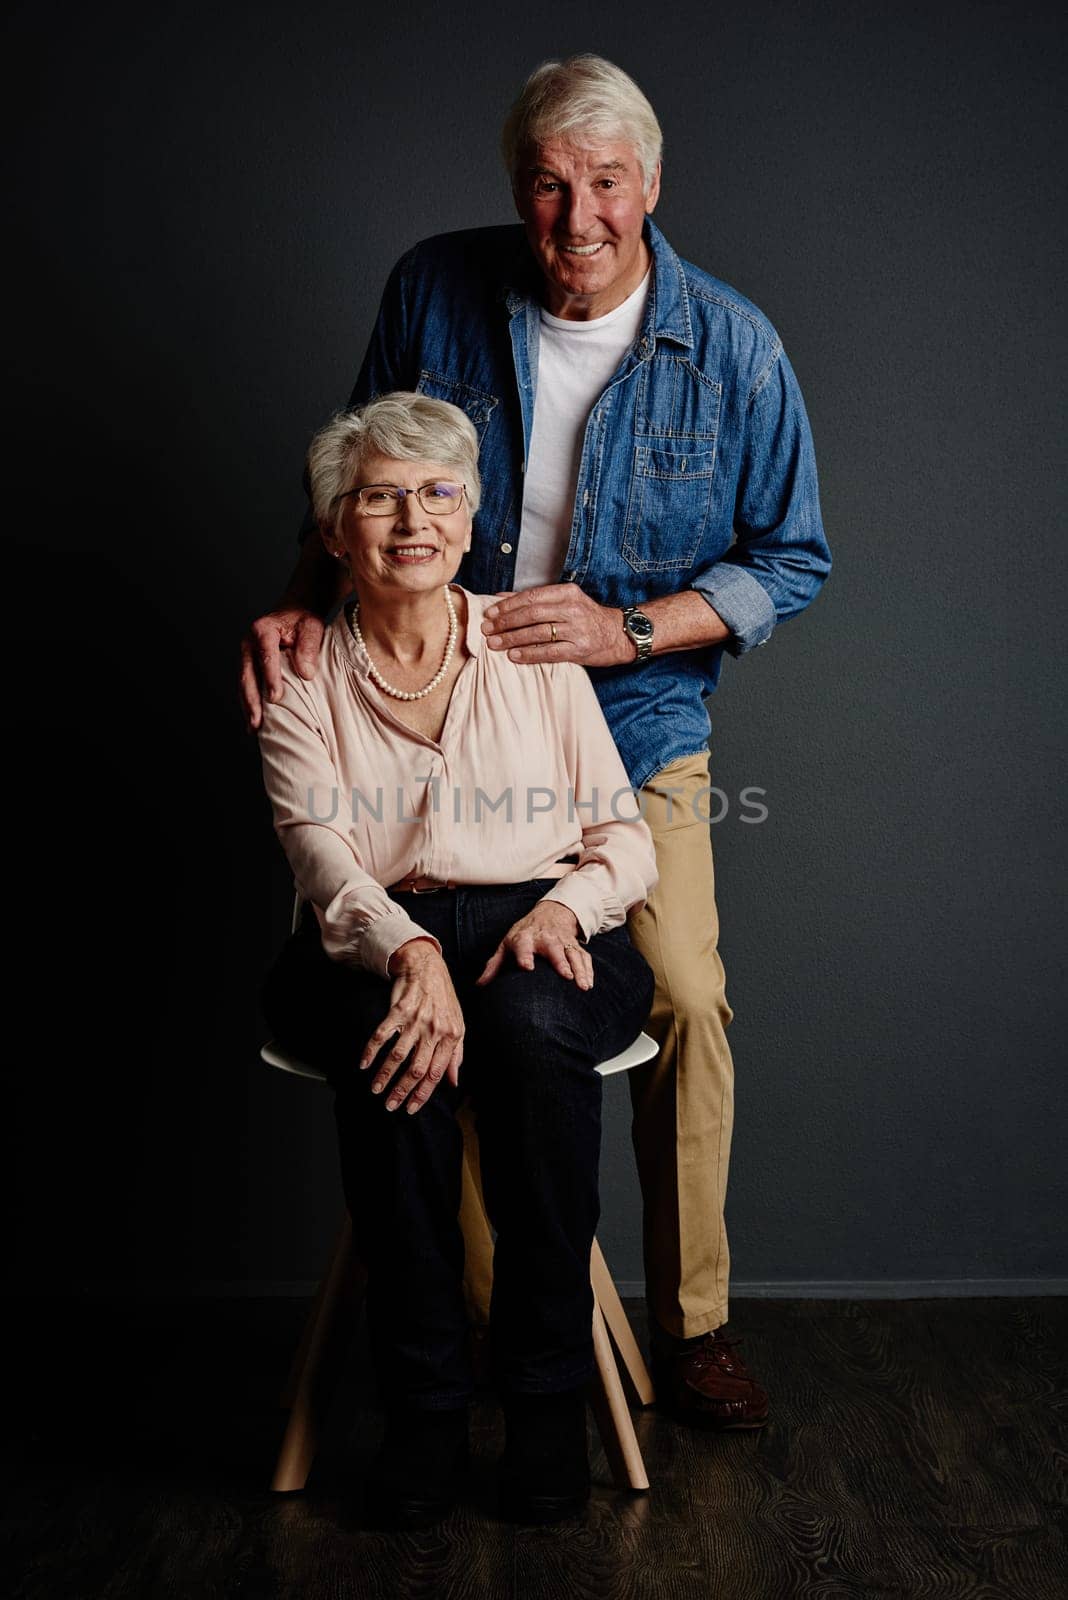 Me and her against the world. Studio portrait of an affectionate senior couple posing against a grey background. by YuriArcurs